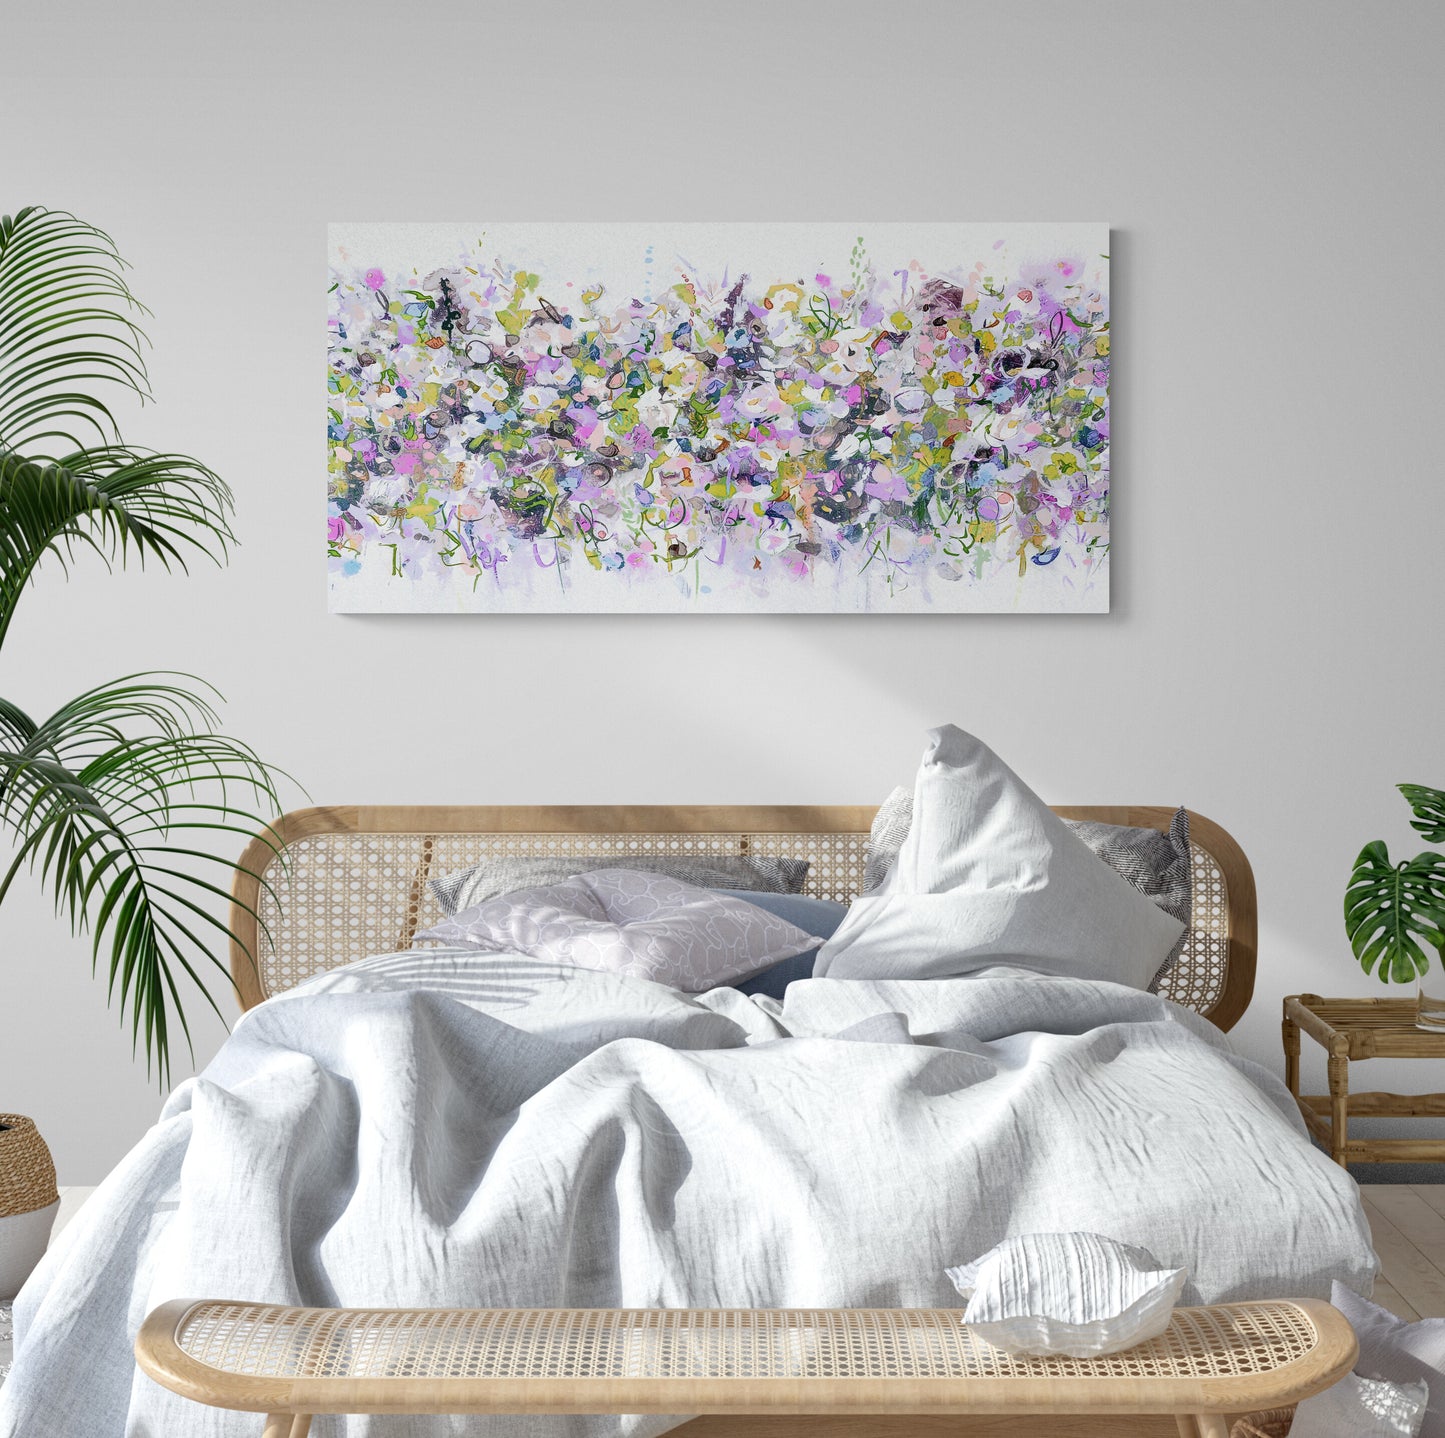 Pink, Purple and White Abstract Floral Art Panoramic Giclee Print on Stretched Canvas